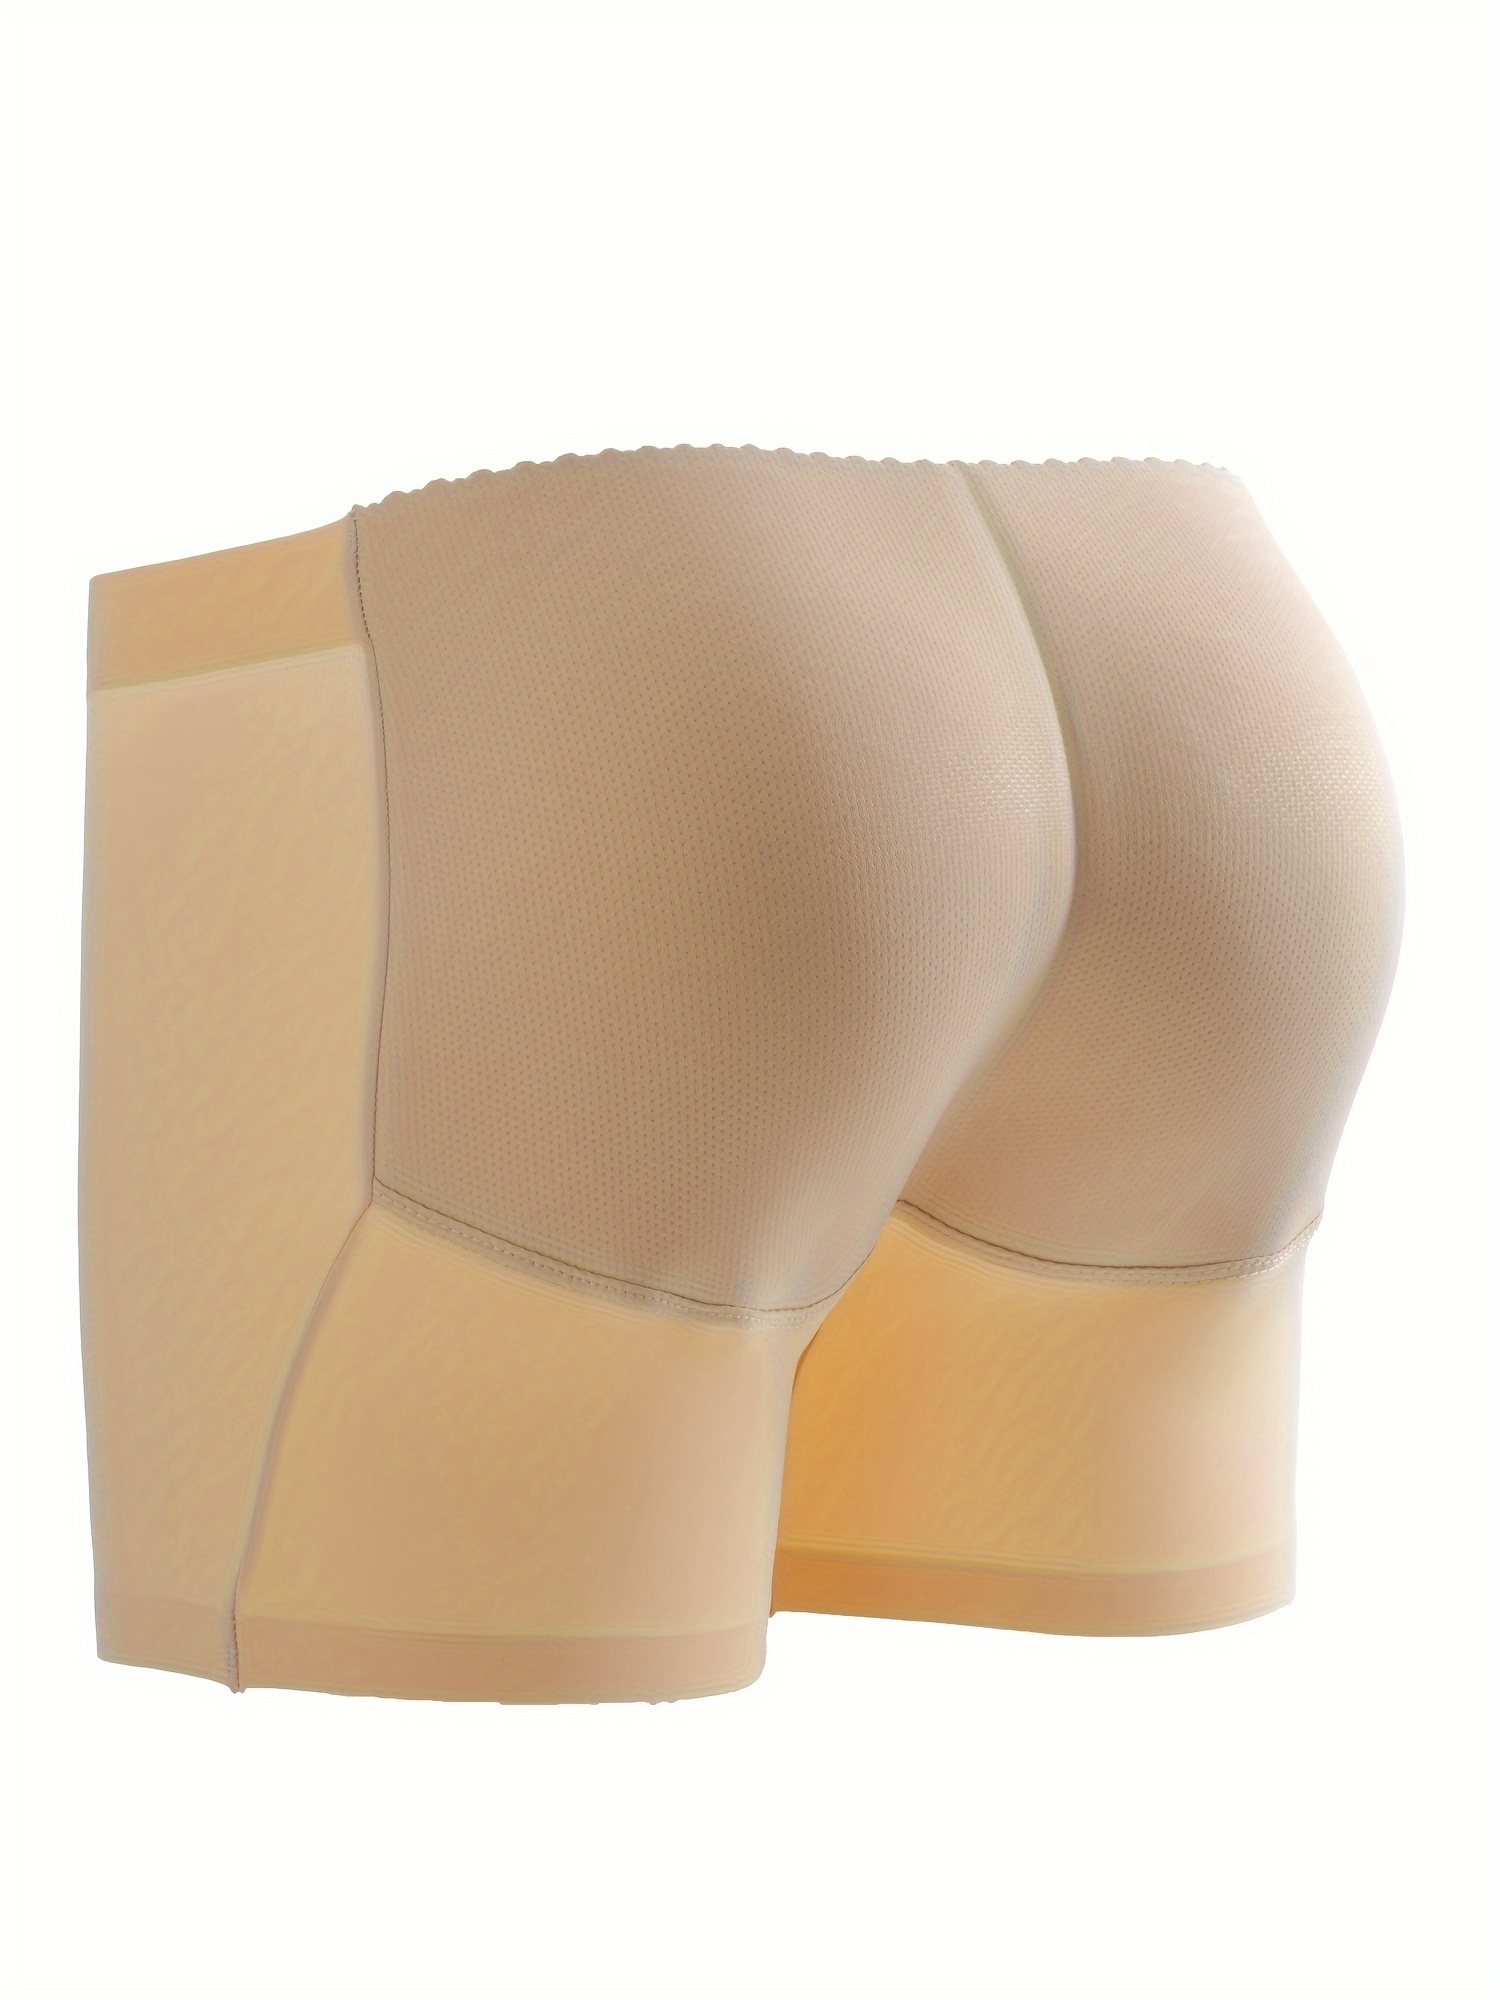 1 Pair Men Sponge Butt Padded Breathable Hip Up Shaper Cup